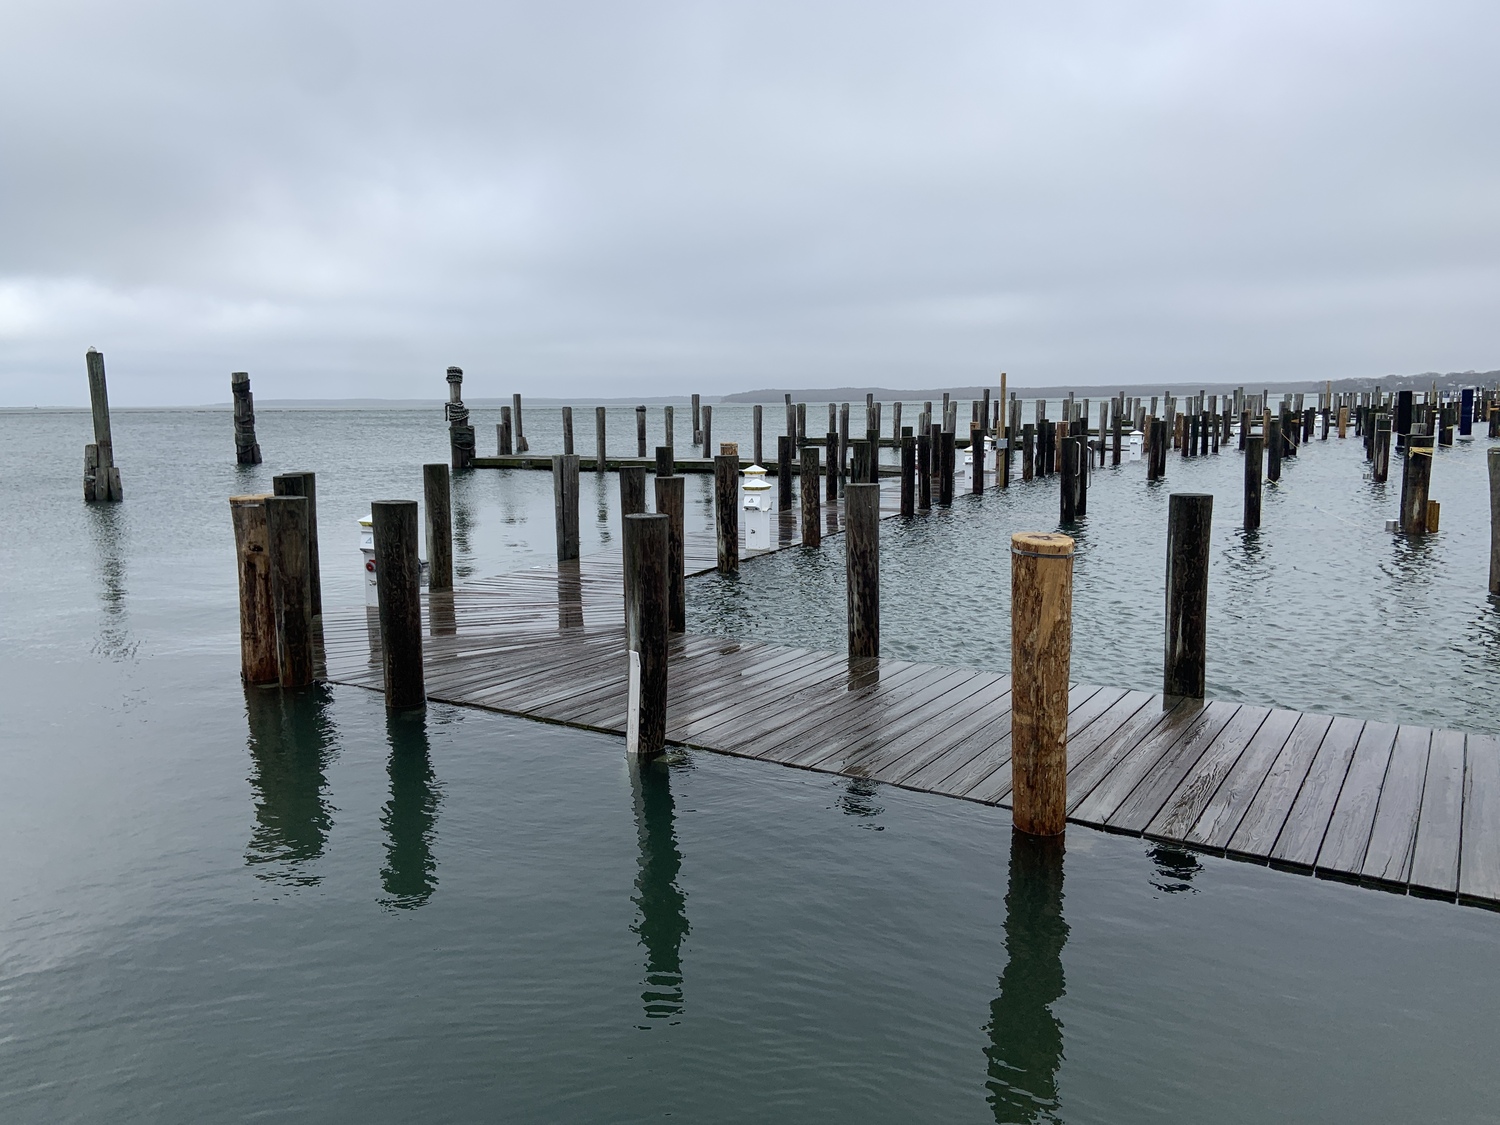 The water was level with docks at Waterfront Marina in Sag Harbor at high tide following Saturday's heavy rain and winds. STEPHEN J. KOTZ